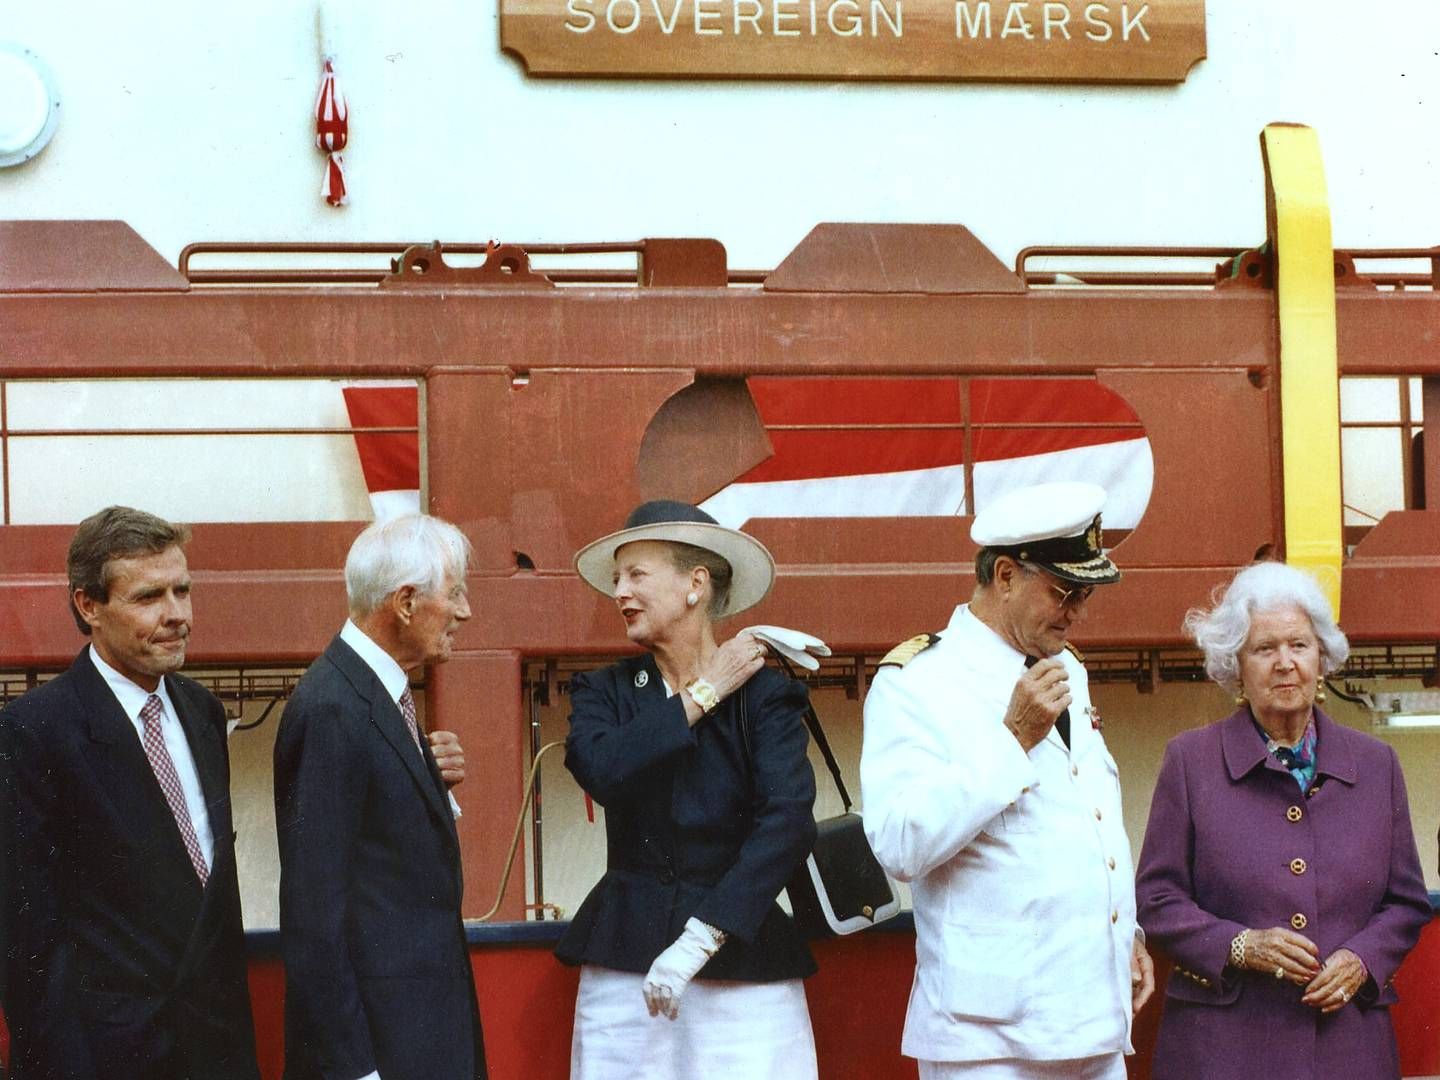 Maersk group head at the time Jess Søderberg, Mærsk Mc-Kinney Møller, the Queen of Denmark, Margrethe II, and Prince Henrik of Denmark in 1997 when the ship was launched. | Photo: Carsten Andreasen/Ritzau Scanpix